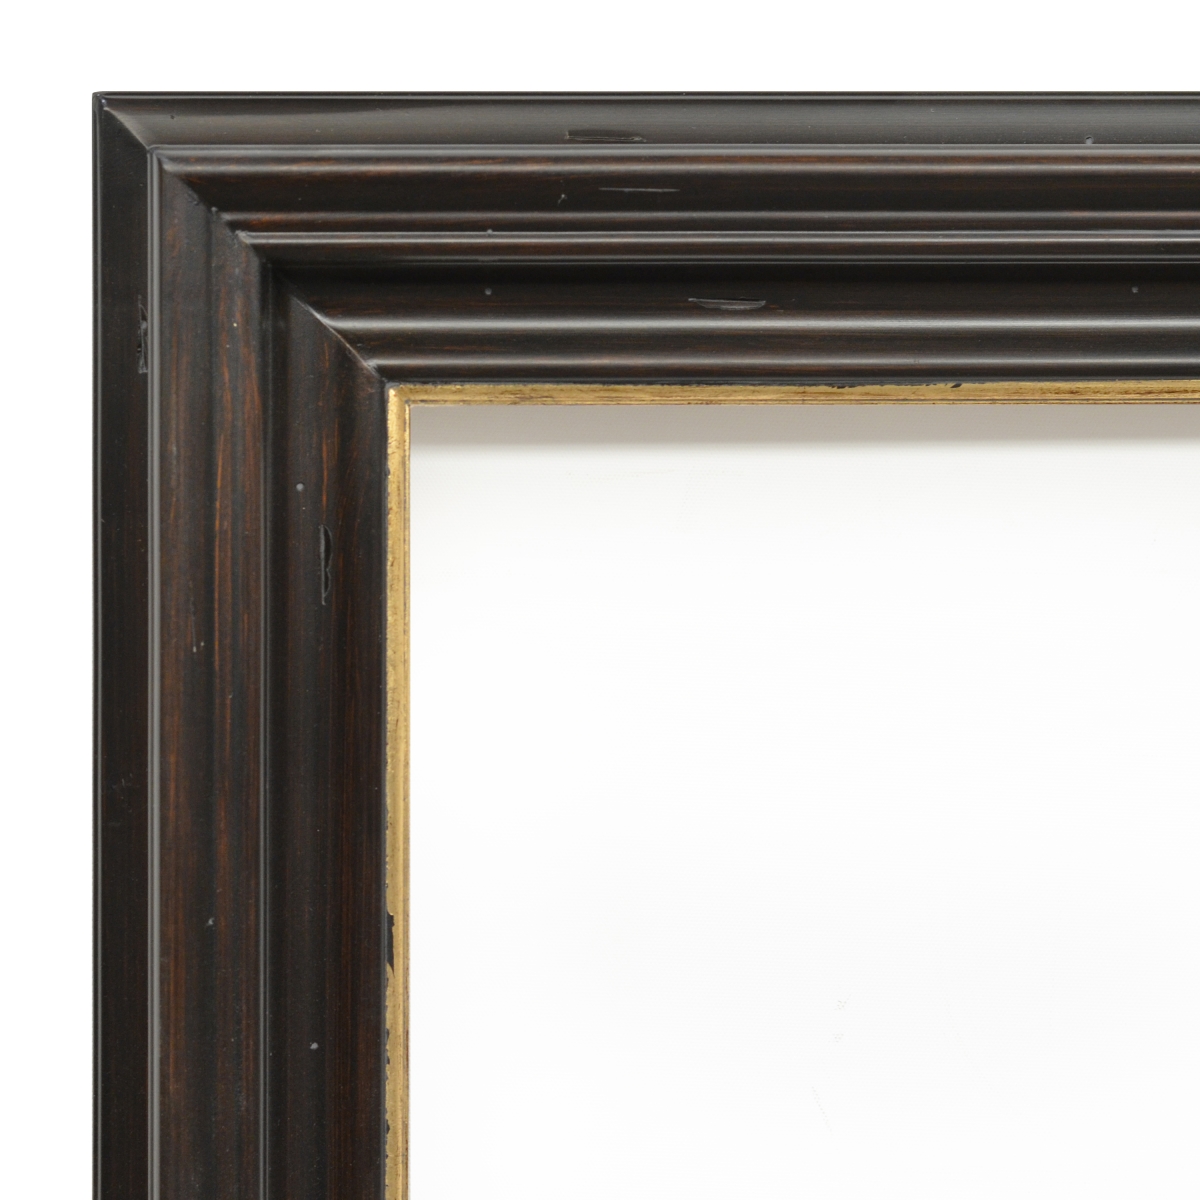 12008362 48 X 60 In. Open Woods Frame - Burnished Cherry